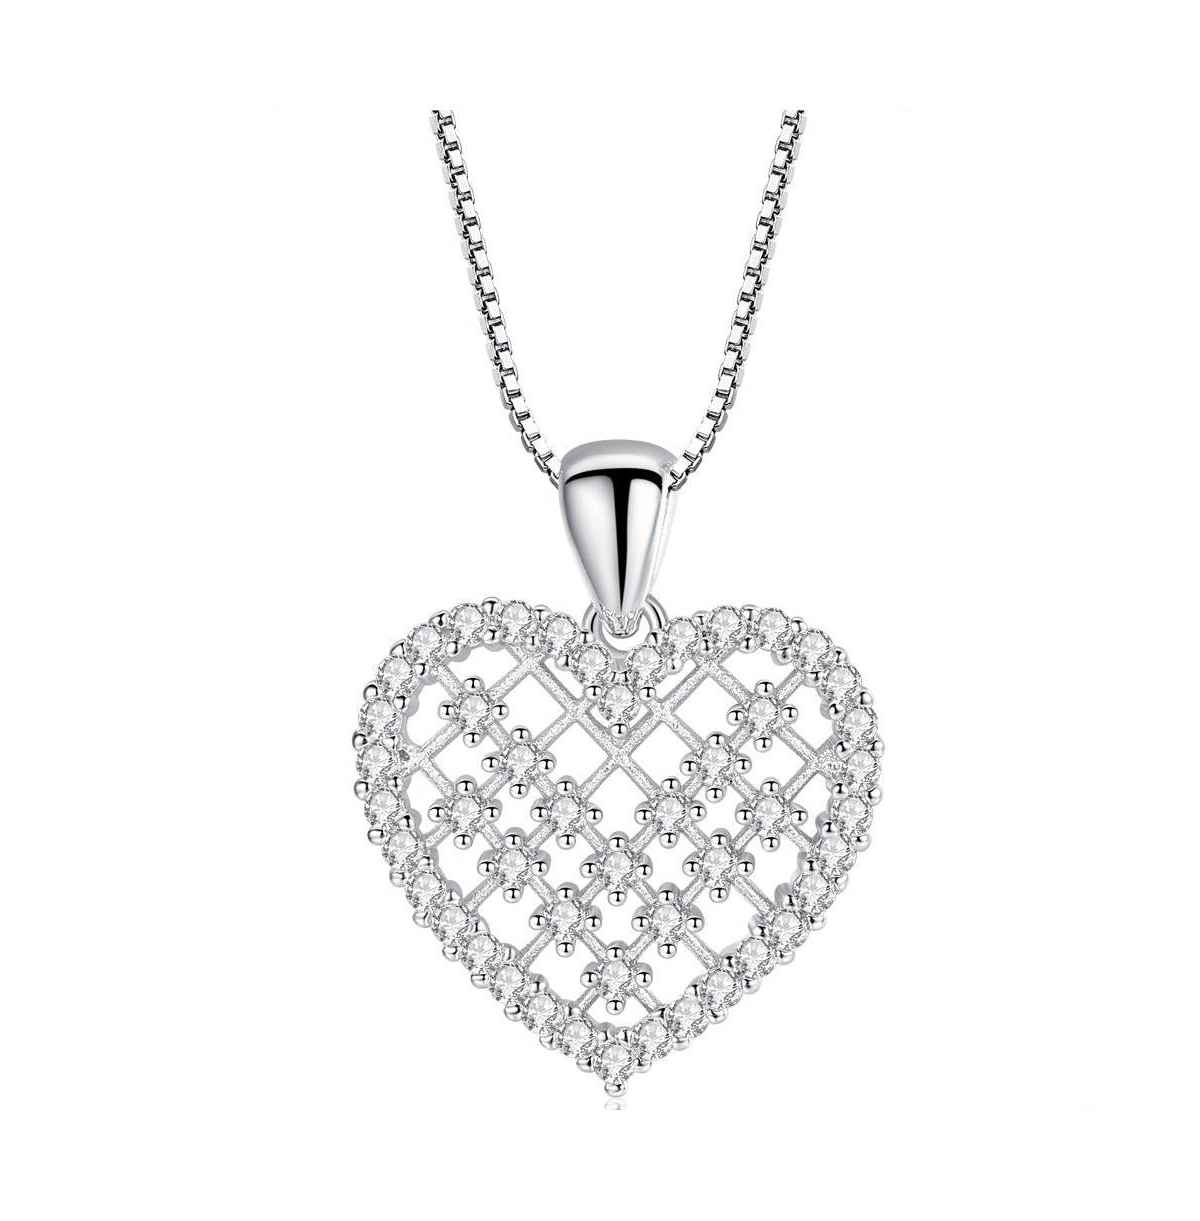 Crystal Heart Necklace for Women - Silver